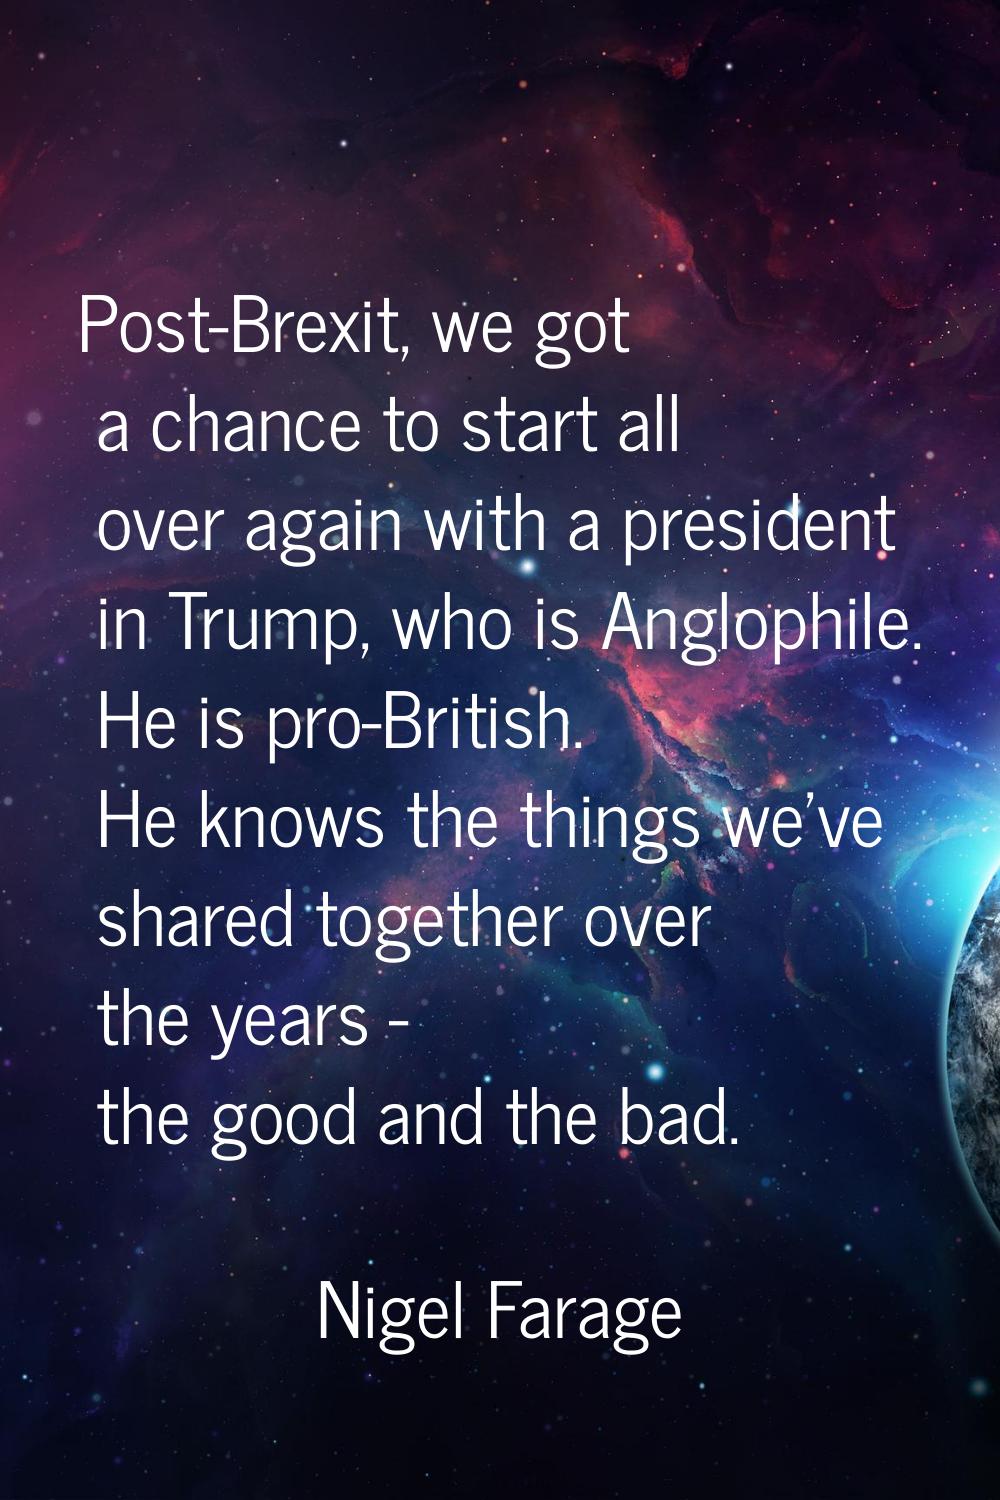 Post-Brexit, we got a chance to start all over again with a president in Trump, who is Anglophile. 